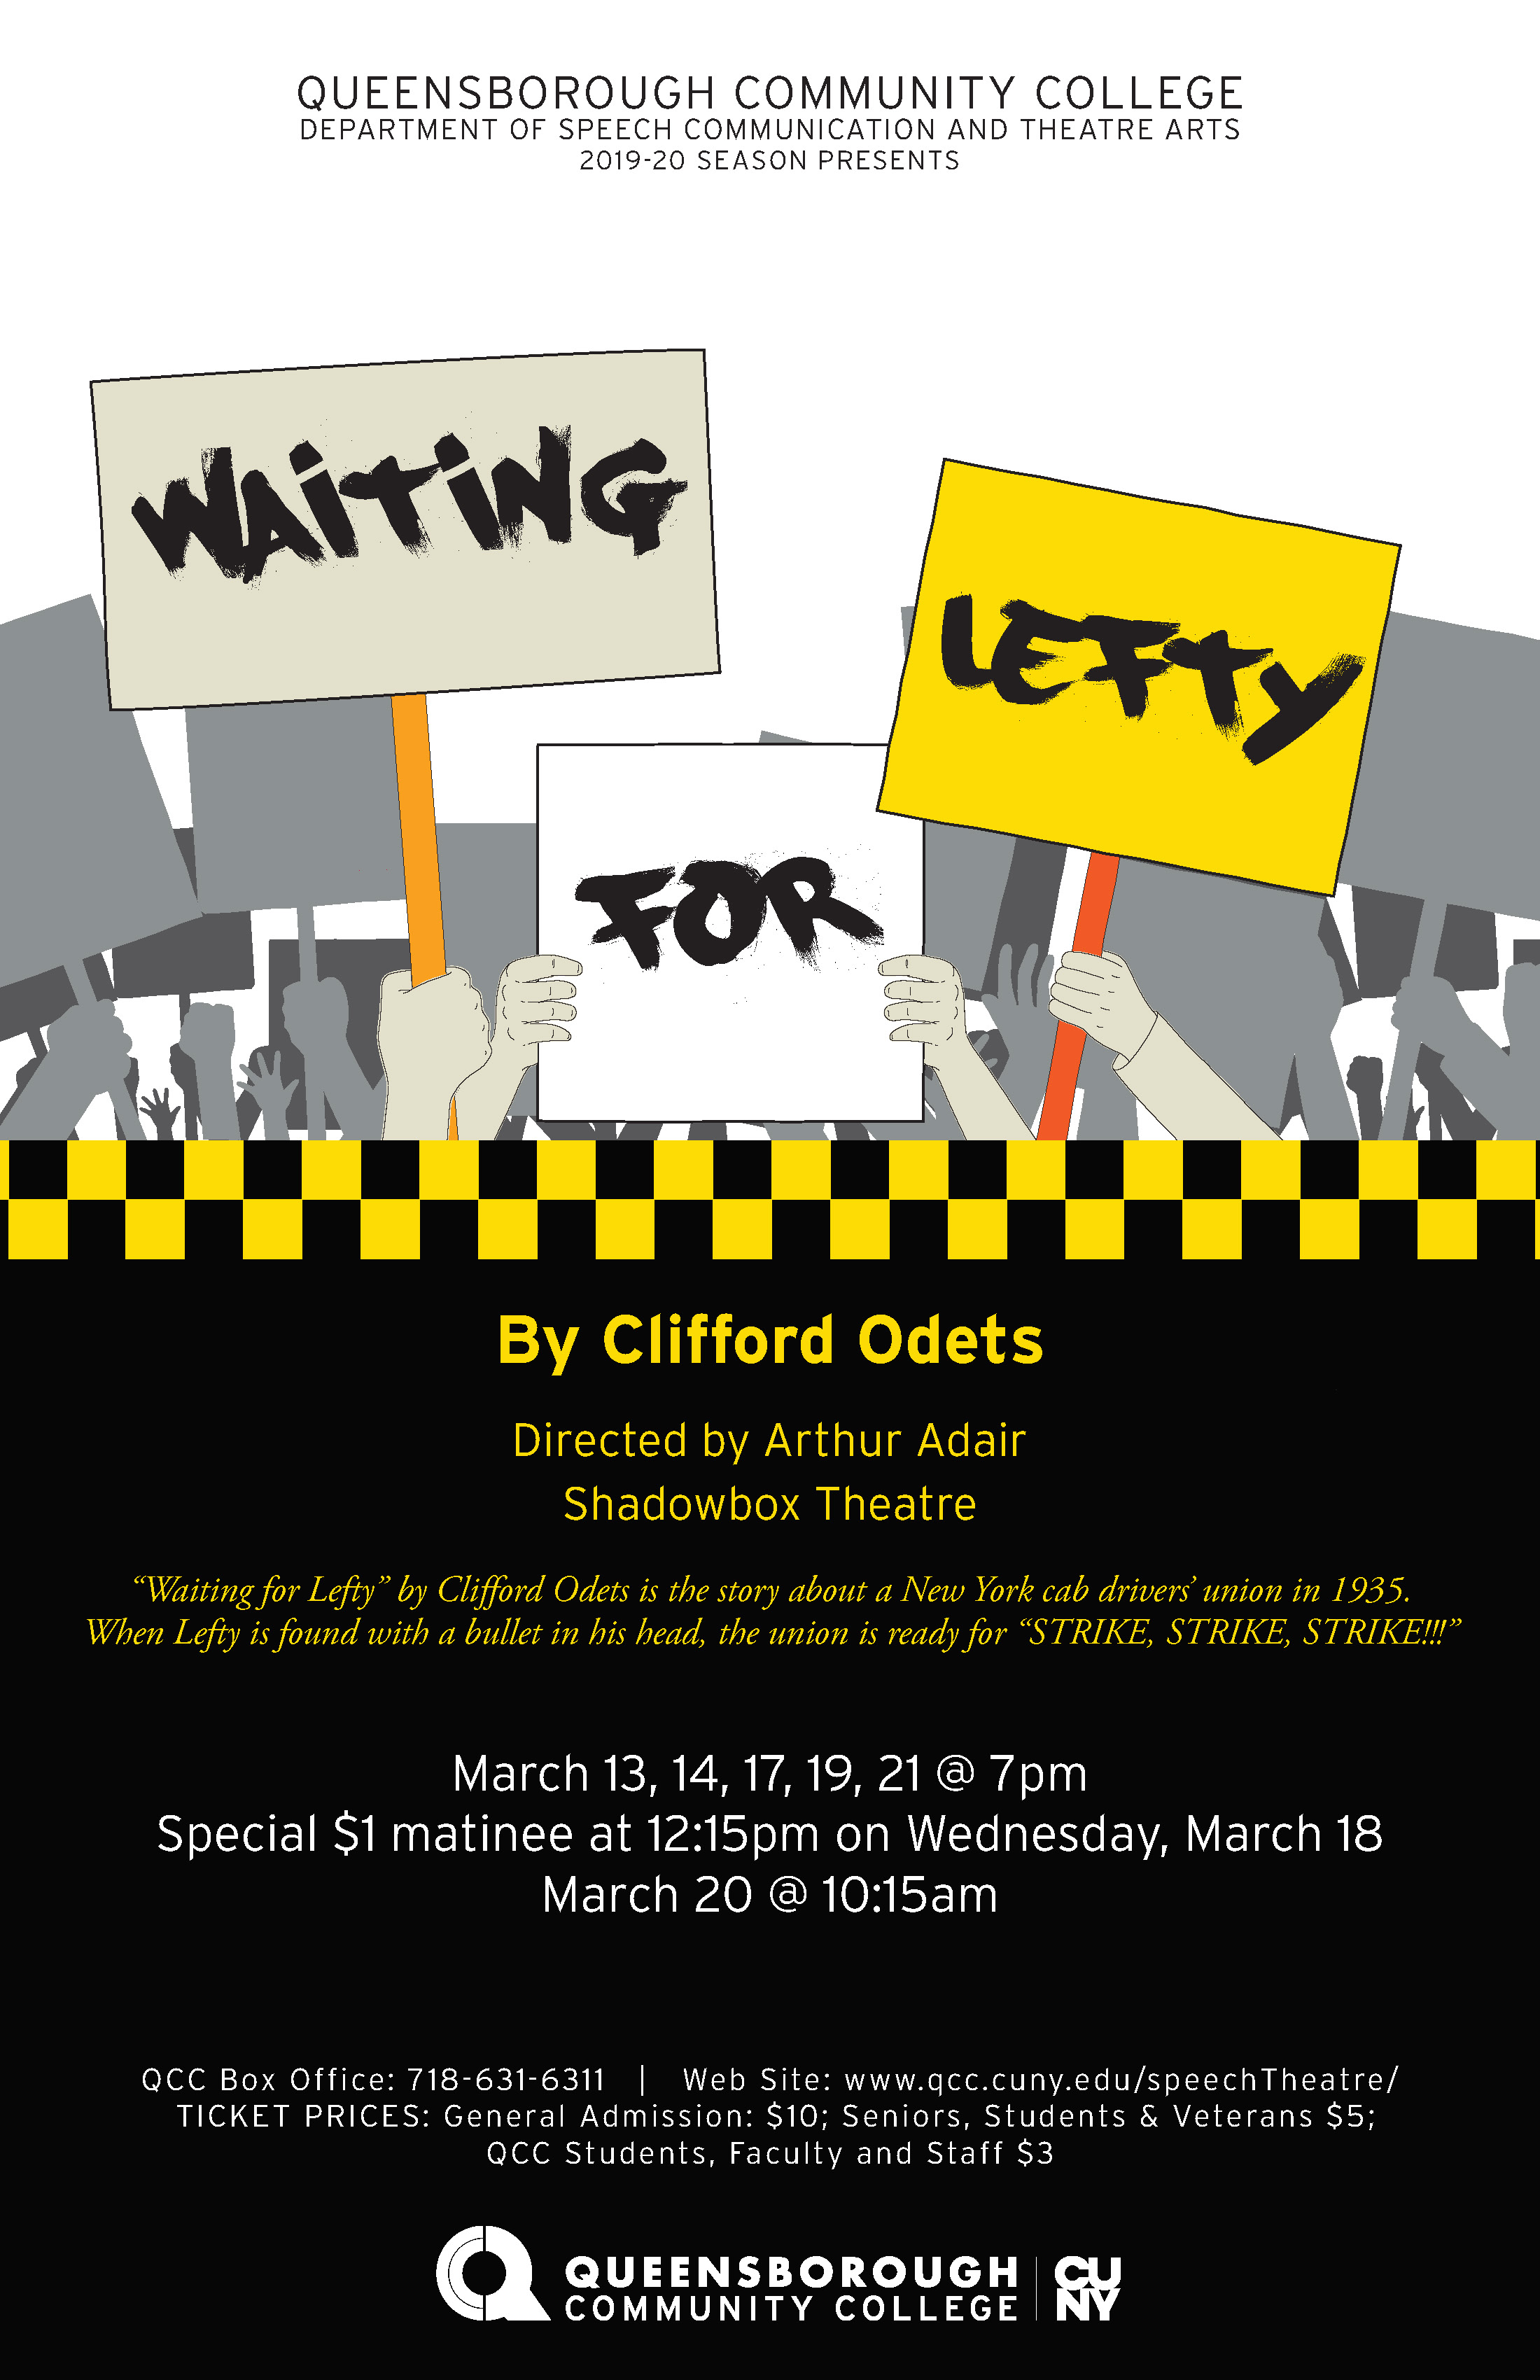 This is a poster for the first spring 2020 production of ‘Waiting for Lefty’ by Clifford Odets and Directed by Professor Adair. The poster displays a group of arms holding signs in support of a strike.